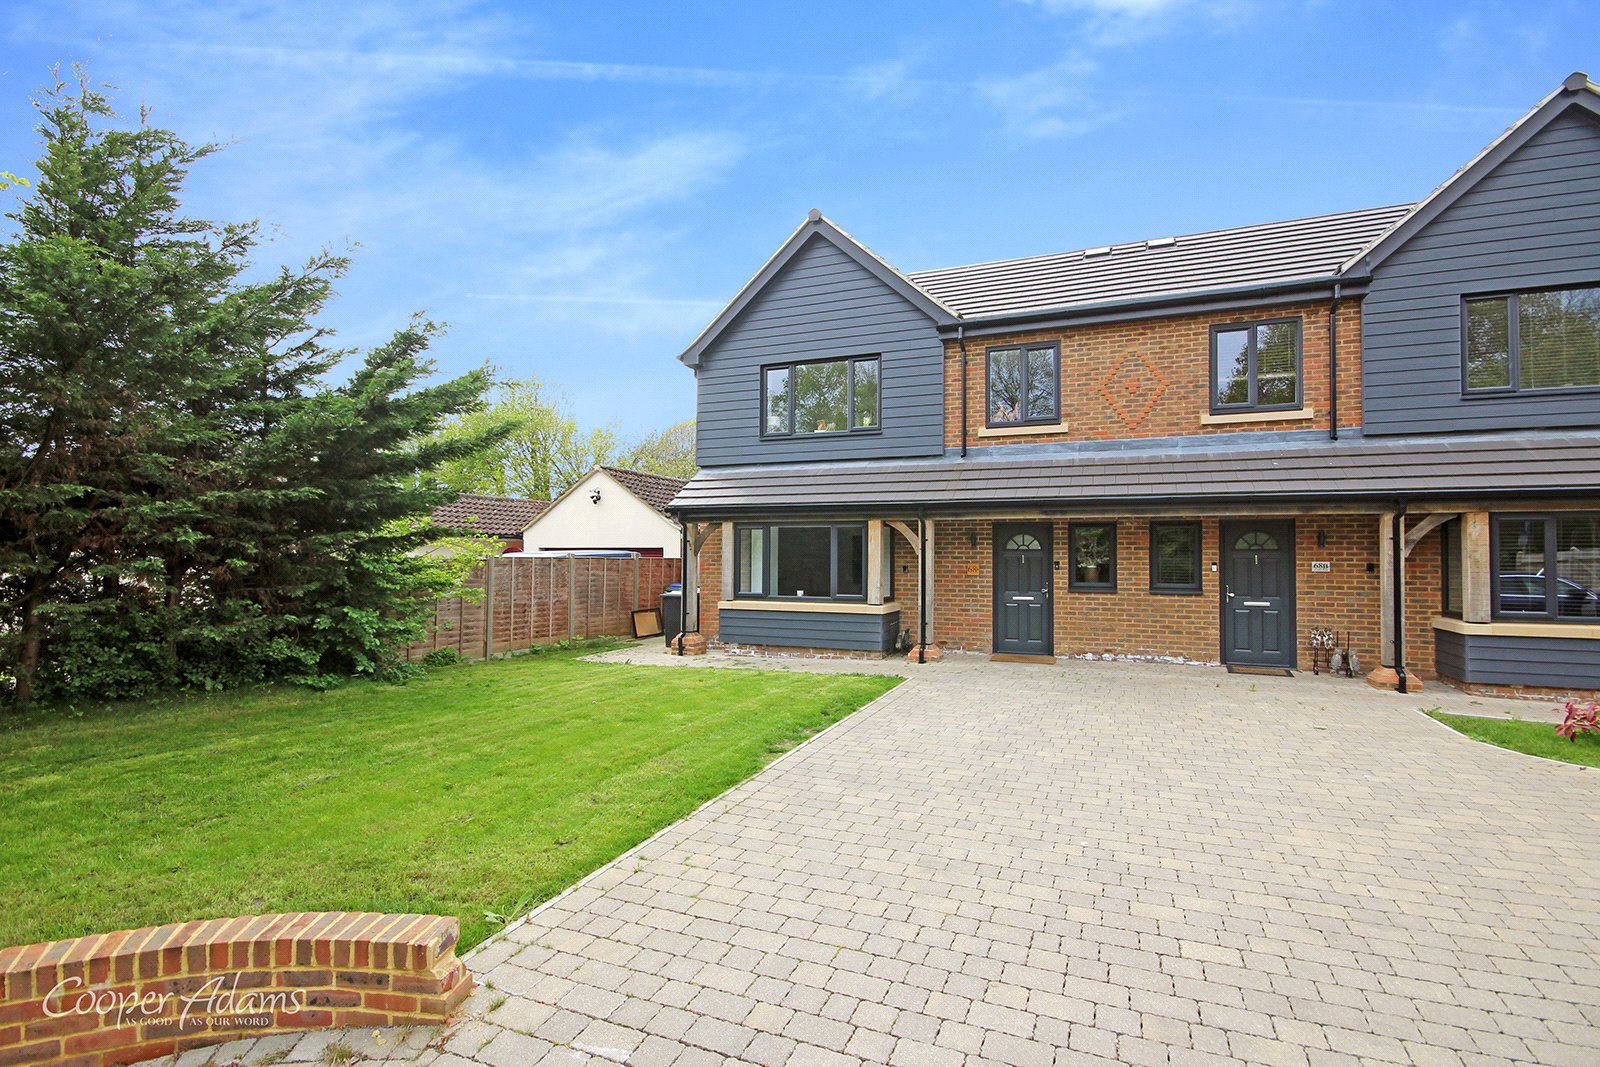 4 bed house for sale in Arundel Road, Angmering 0